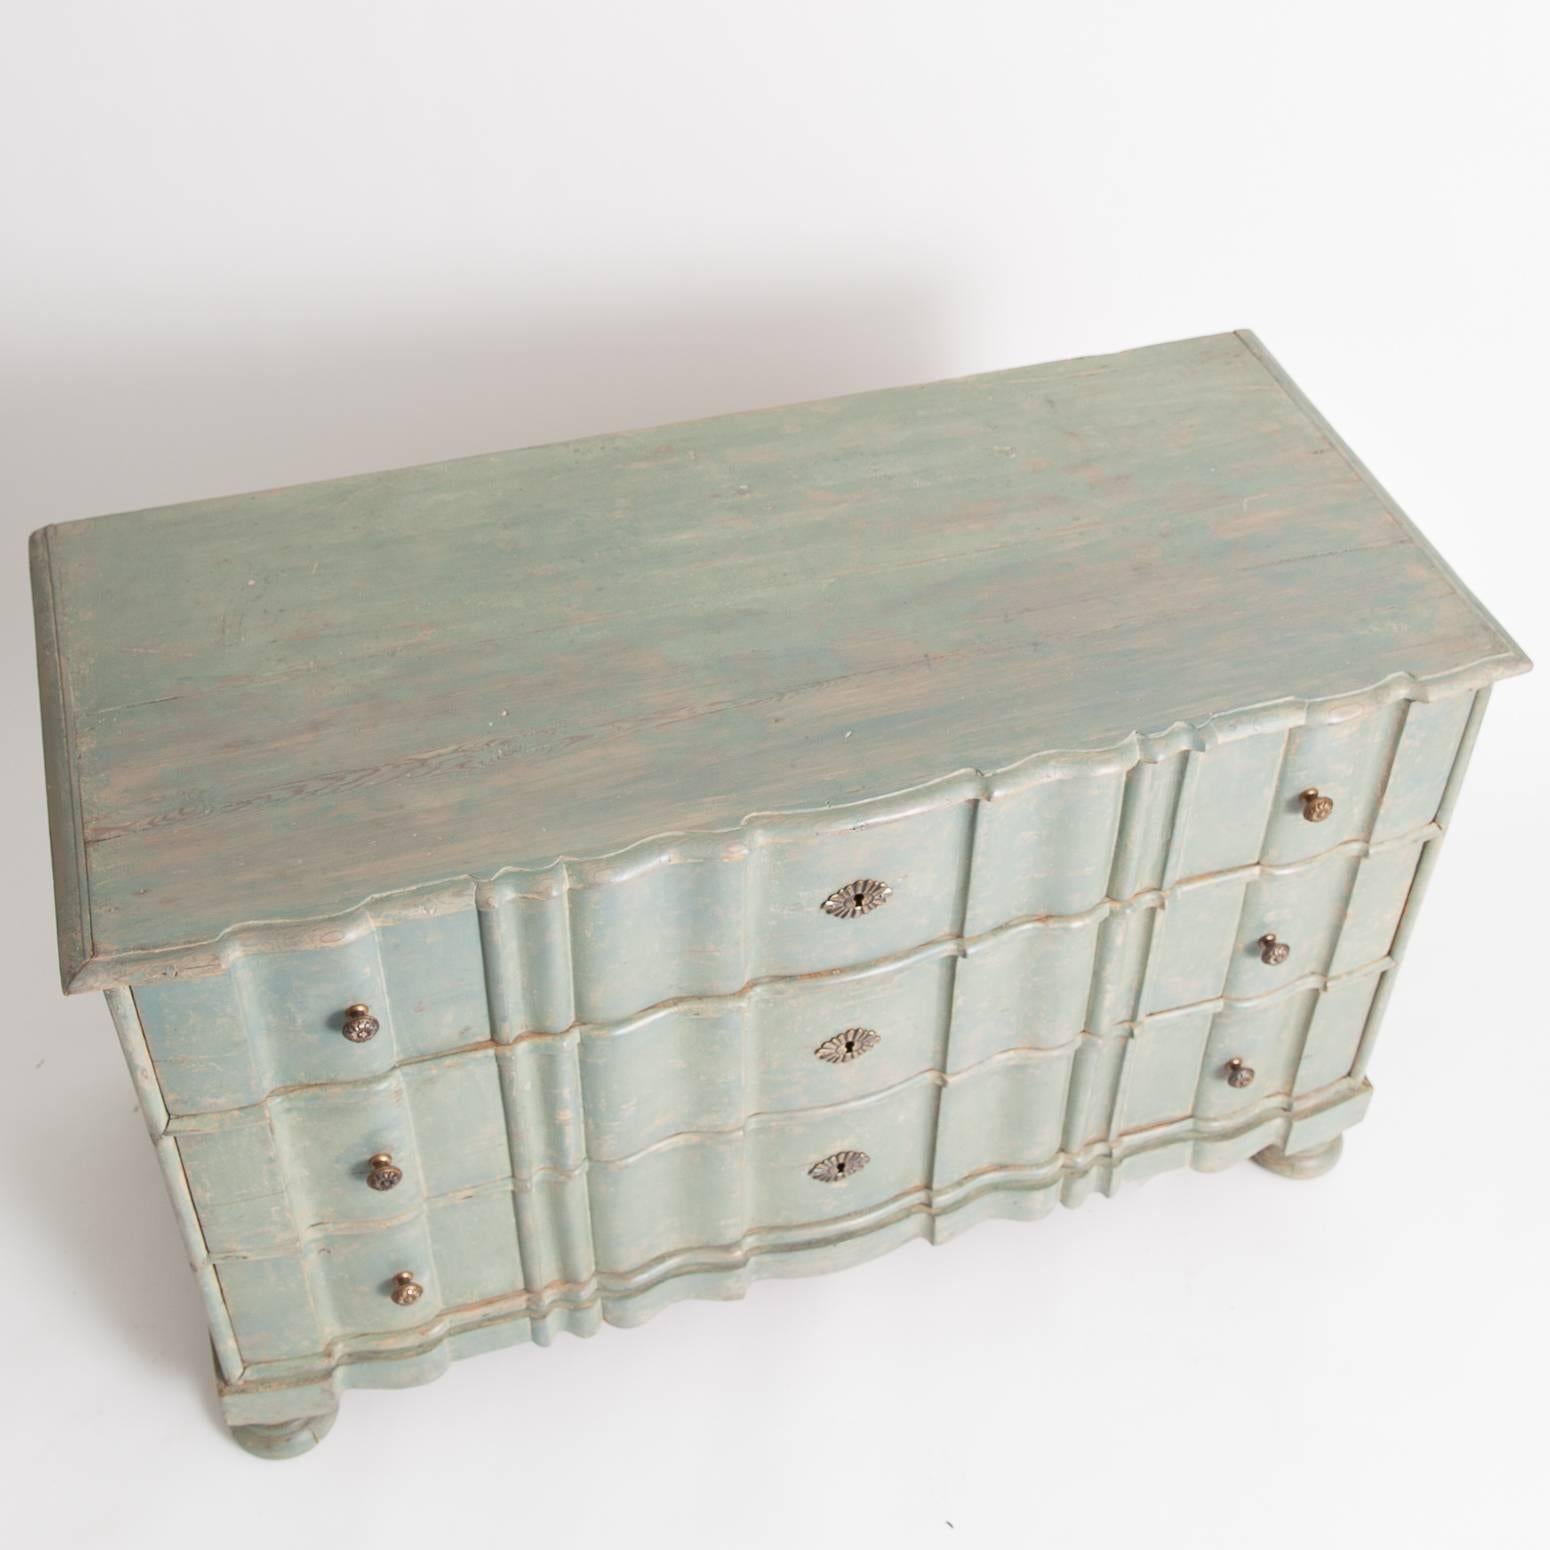 This elegant Swedish Baroque chest has a beautiful proportion and ball feet. Brass escutcheons and knobs adorn the serpentine front. The pale green paint surface is original. This piece dates to 1750.